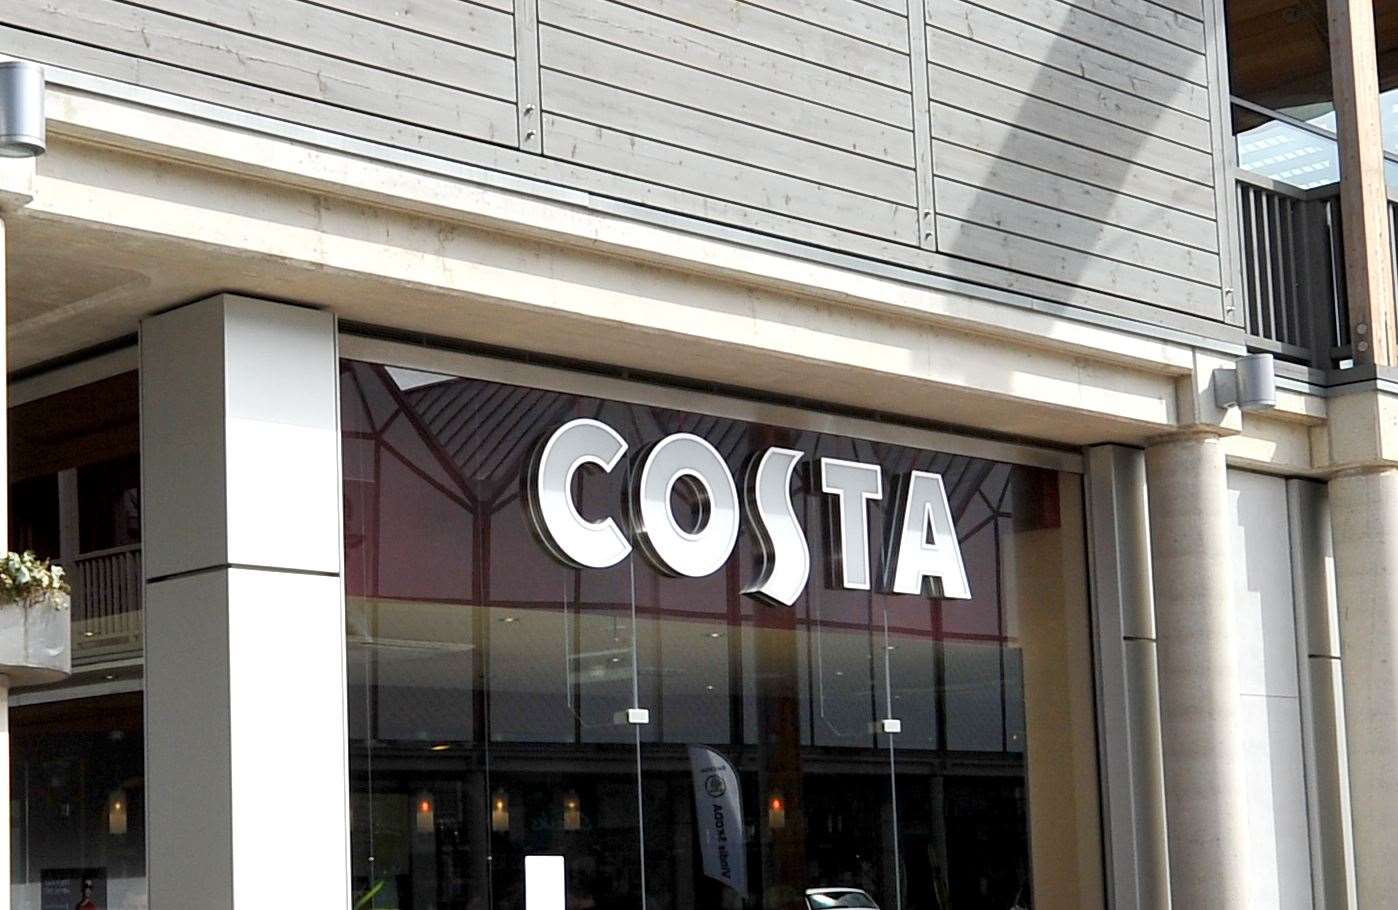 Costa Coffee is set to open a drive thru in Snodland